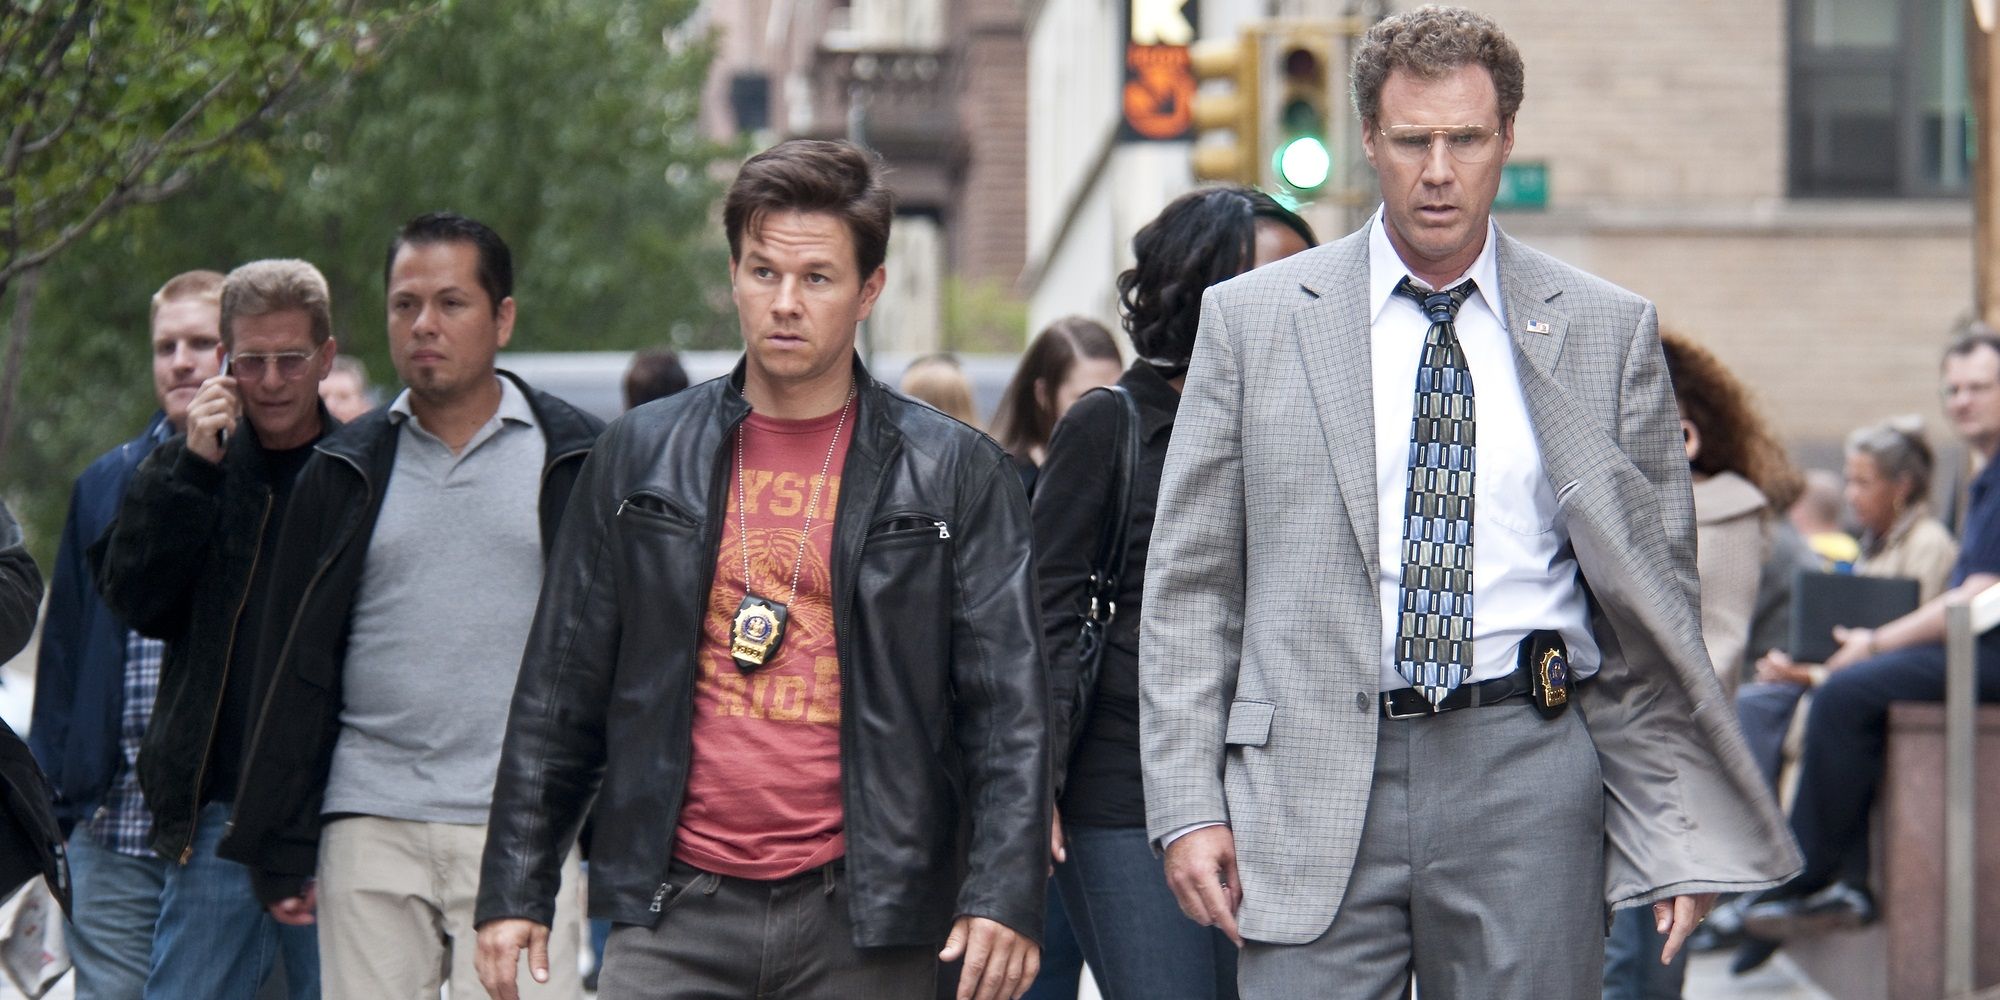 Will Ferrell and Mark Wahlberg on the street in The Other Guys